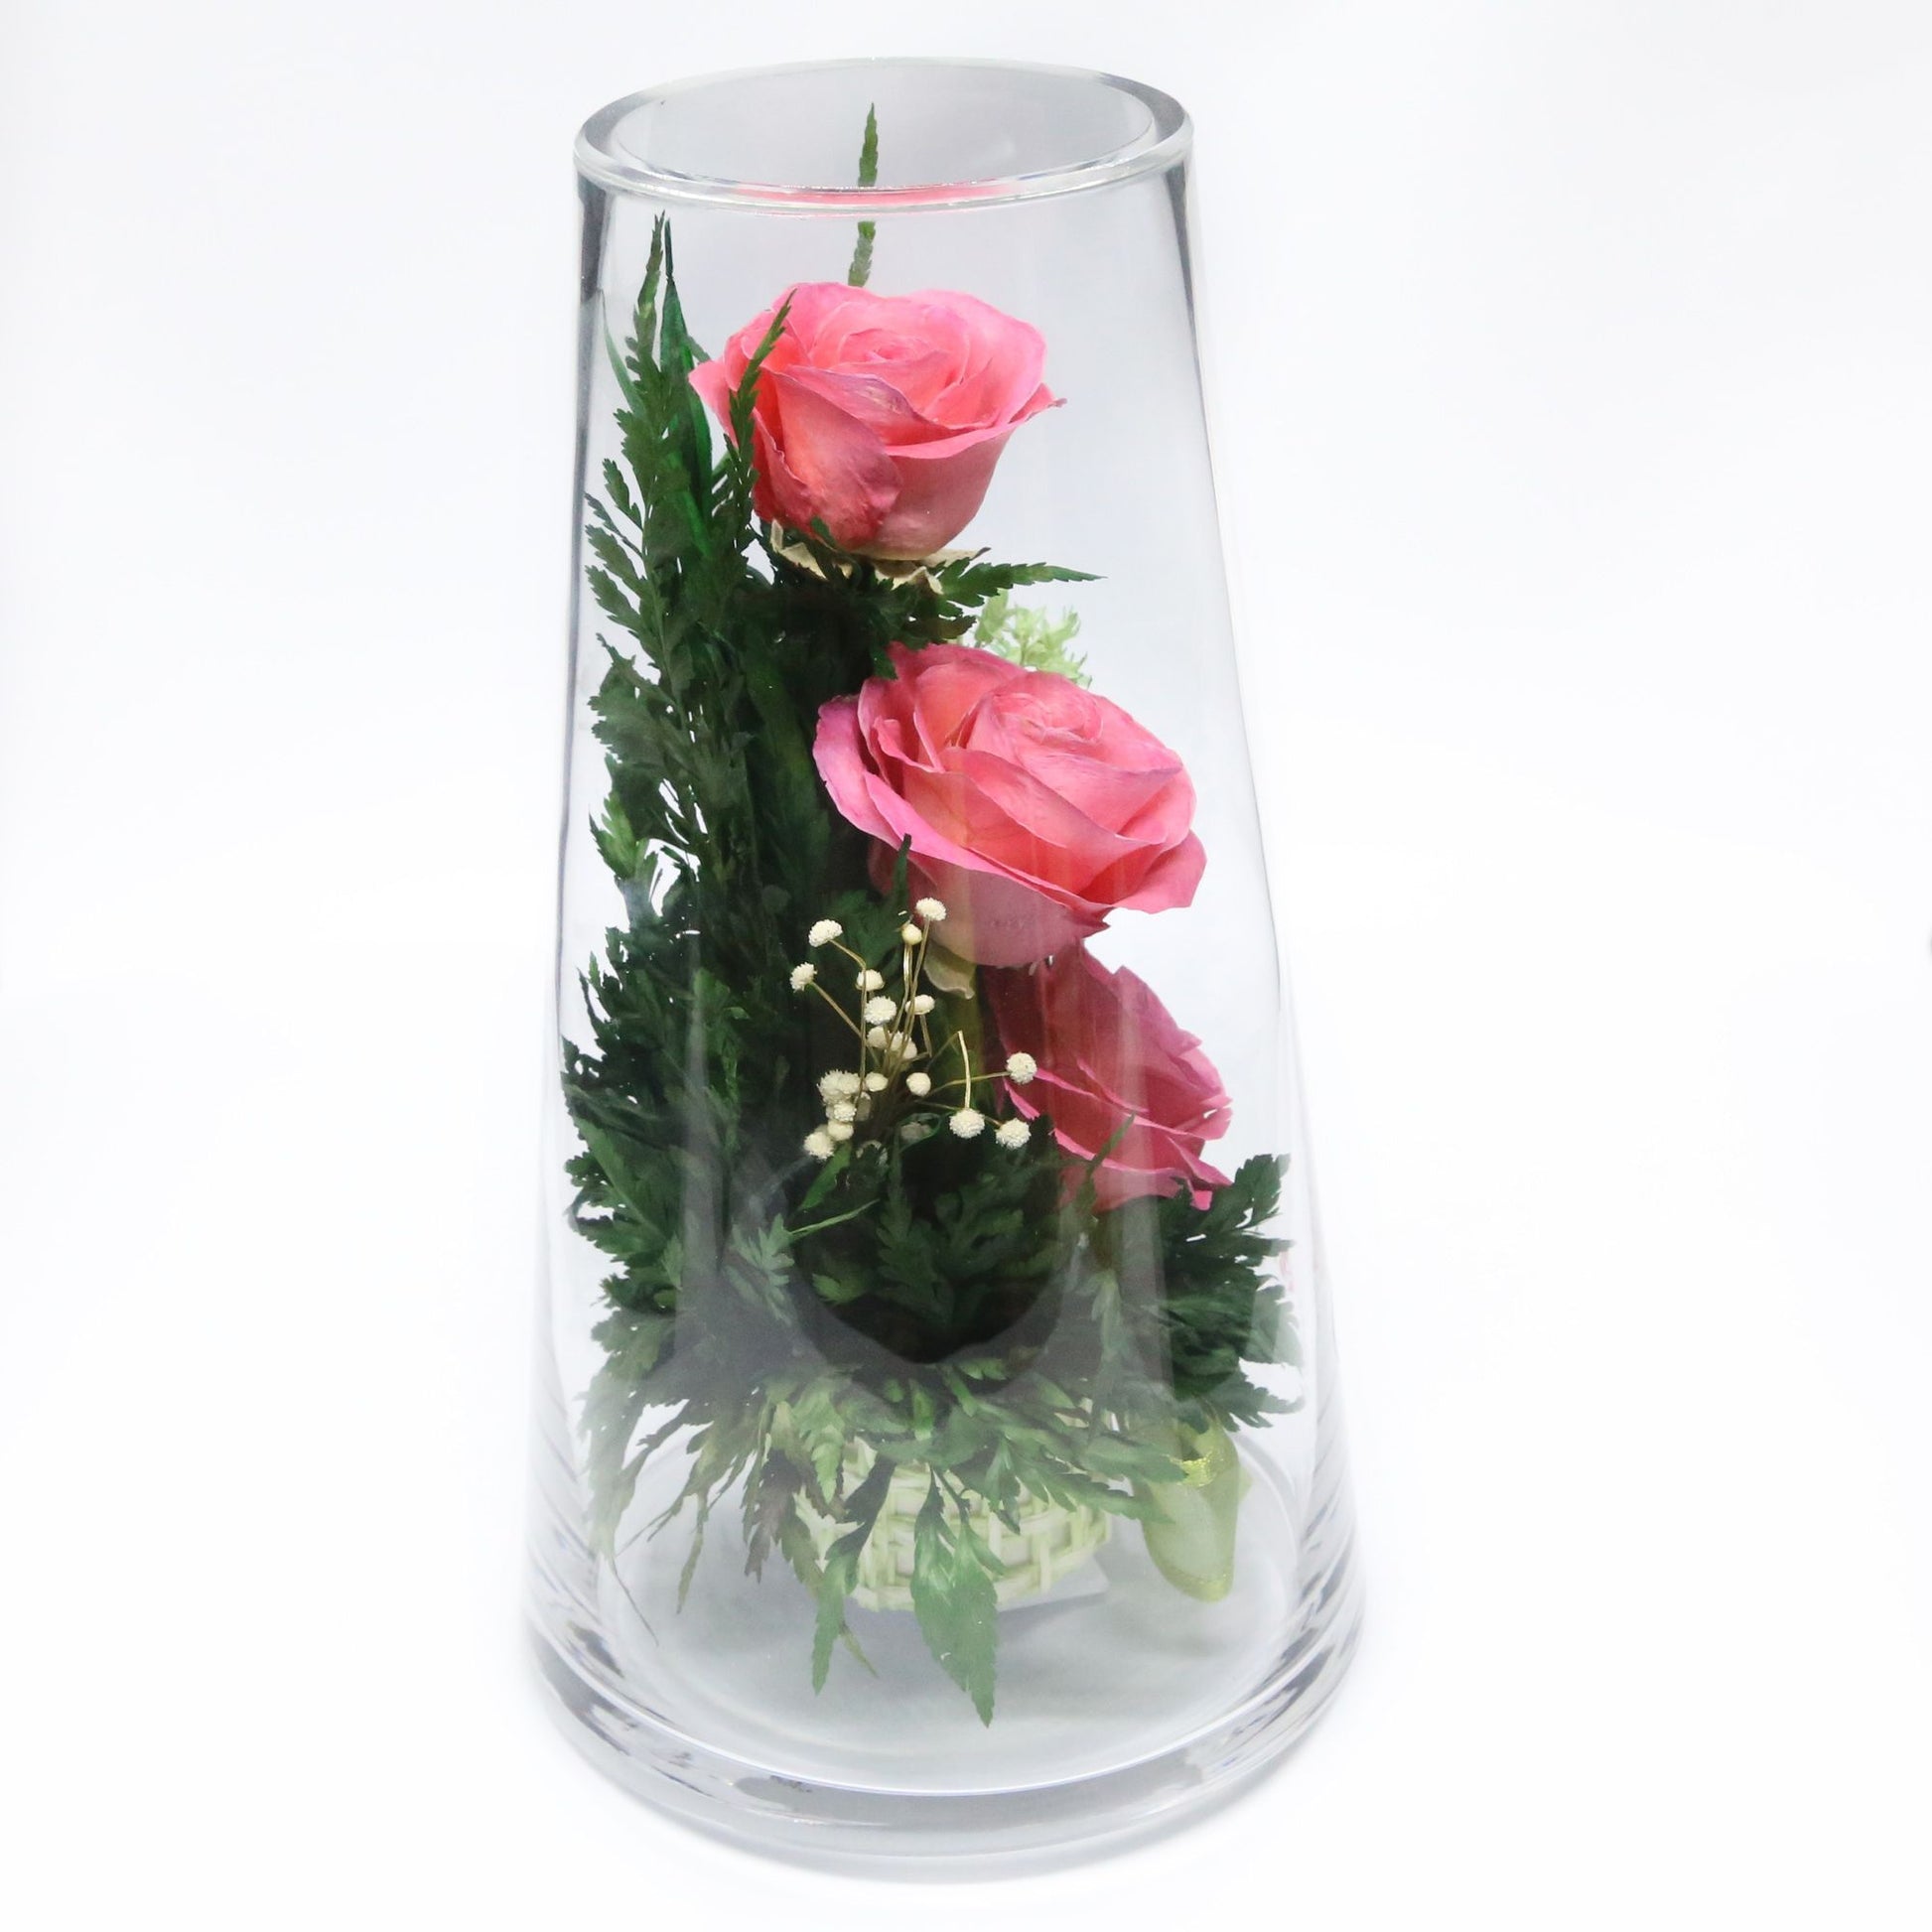 40221 Long-Lasting Pink Roses in a Sealed Glass Vase - FIORA FLOWER